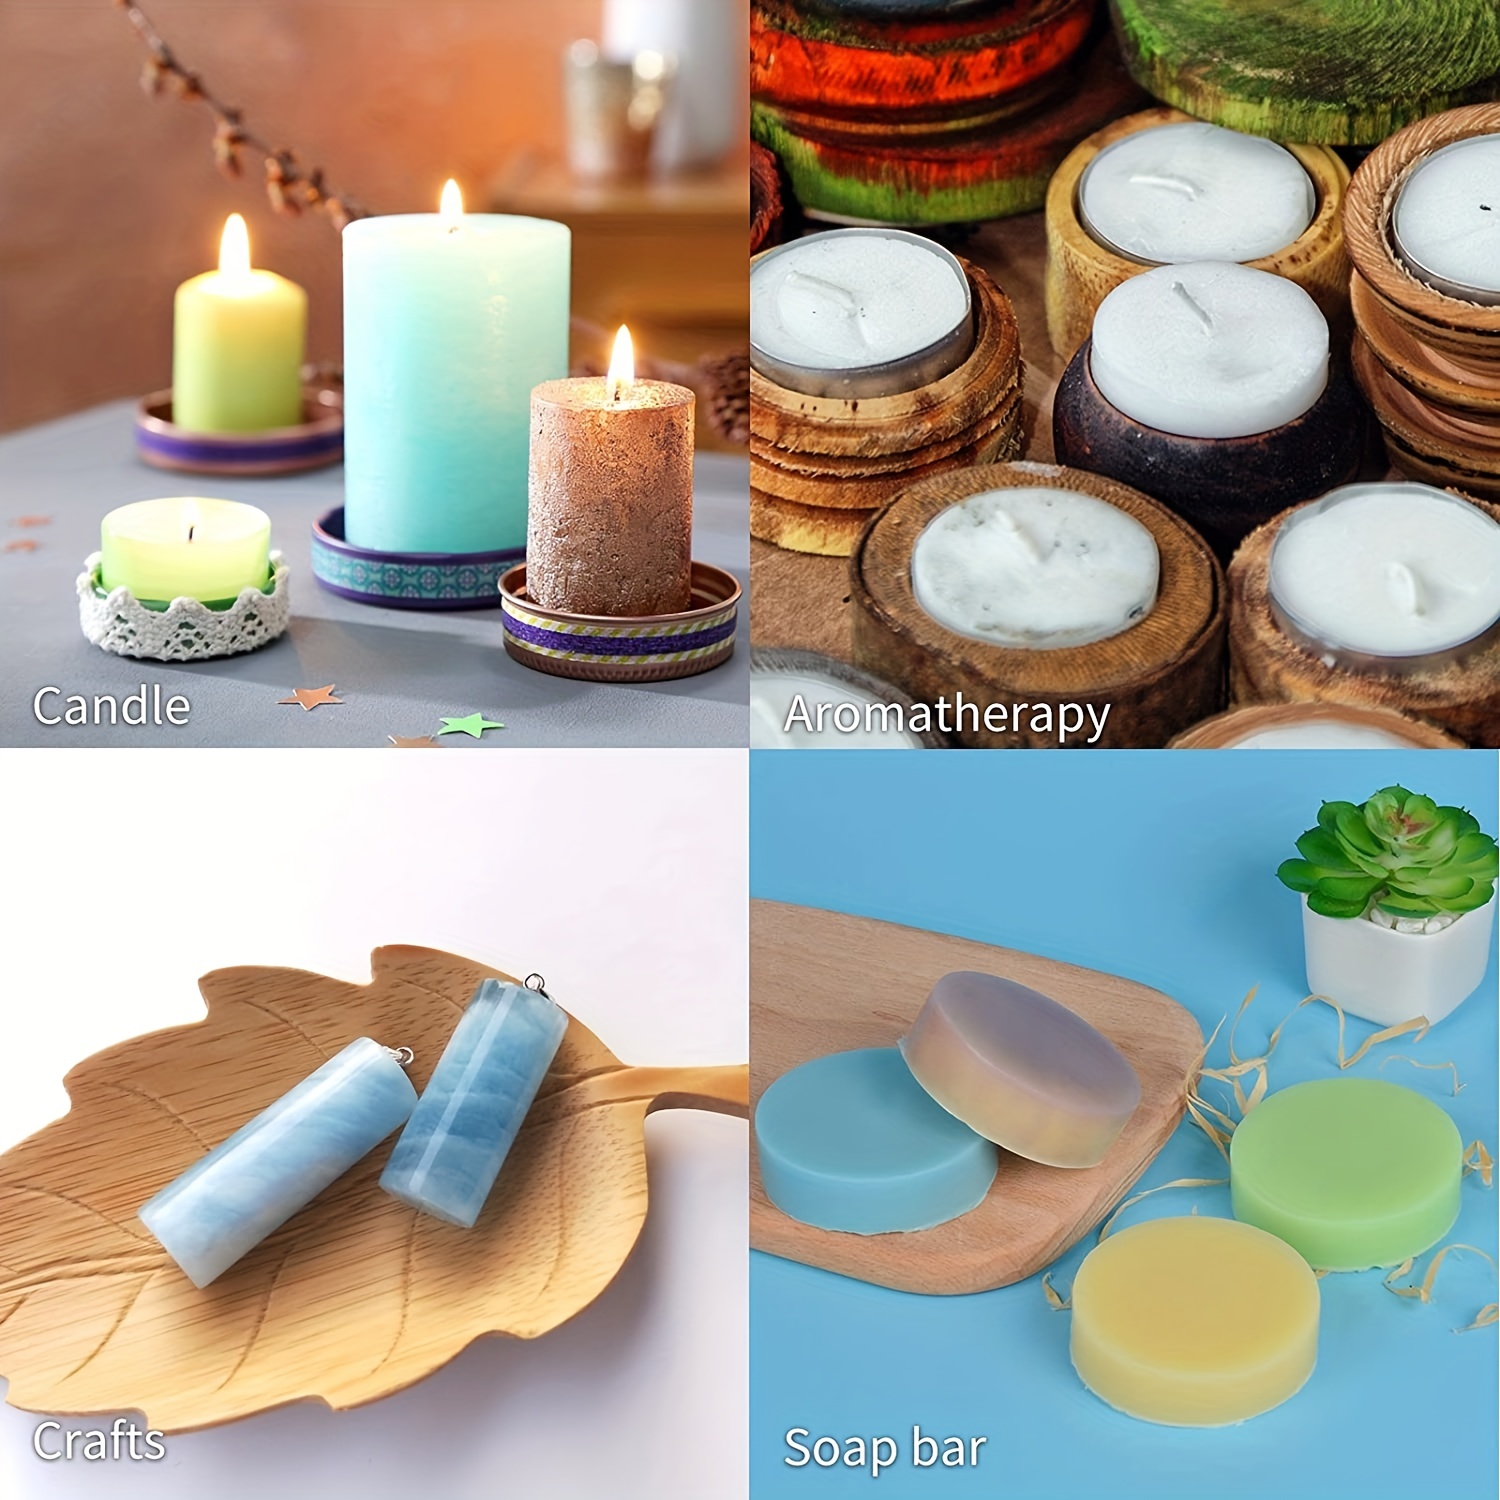 ANHTCZYX Creative Cylinder Candle Silicone Mold Handmade Aromatherapy Soap Wax 3D Flower Mould DIY Candle Making Home Decoration, Carving H0539